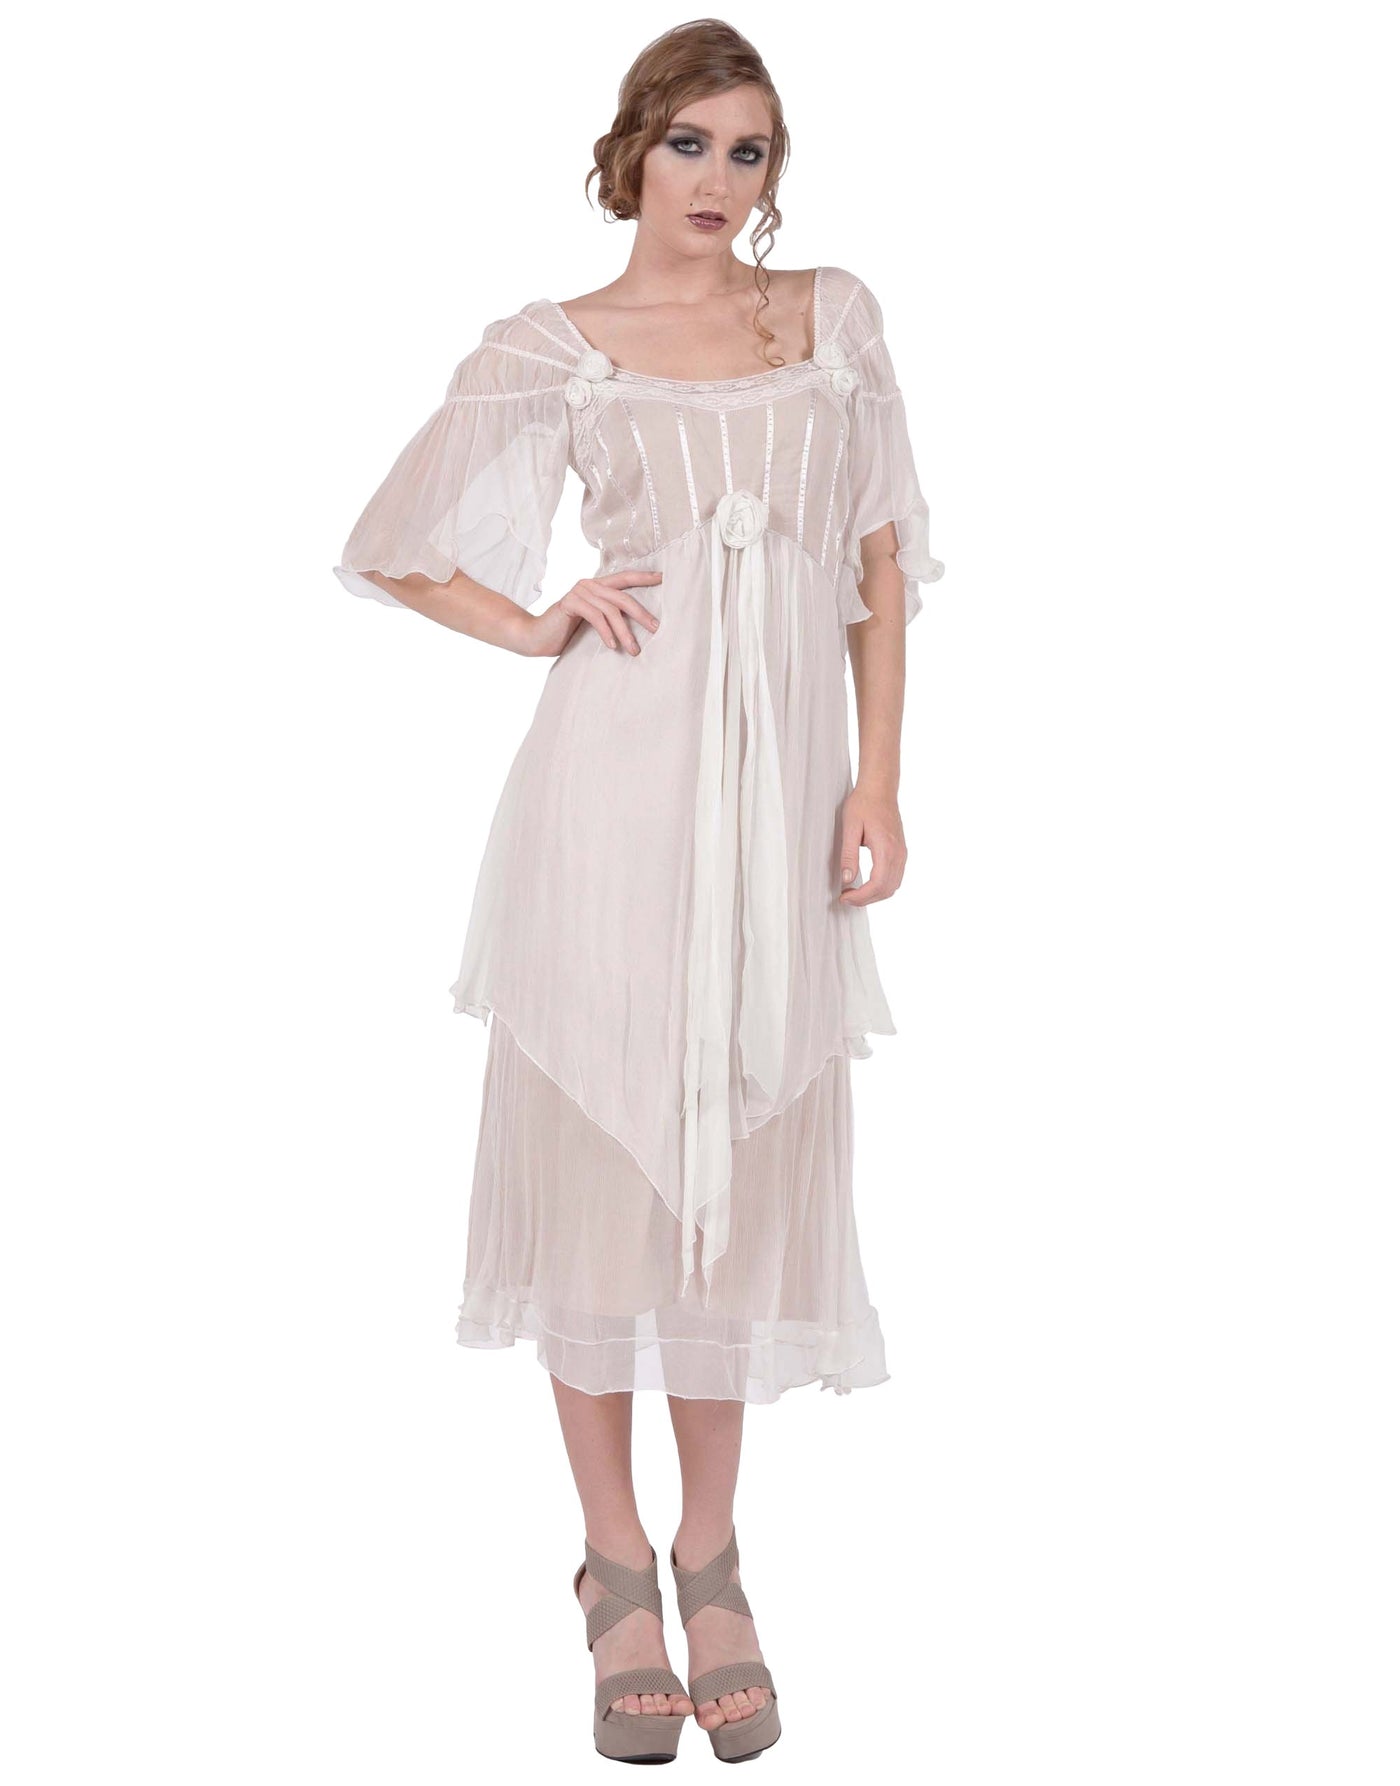 Othelia Off-Shoulder Summer Party Dress in Ivory-Tea by Nataya - SOLD OUT